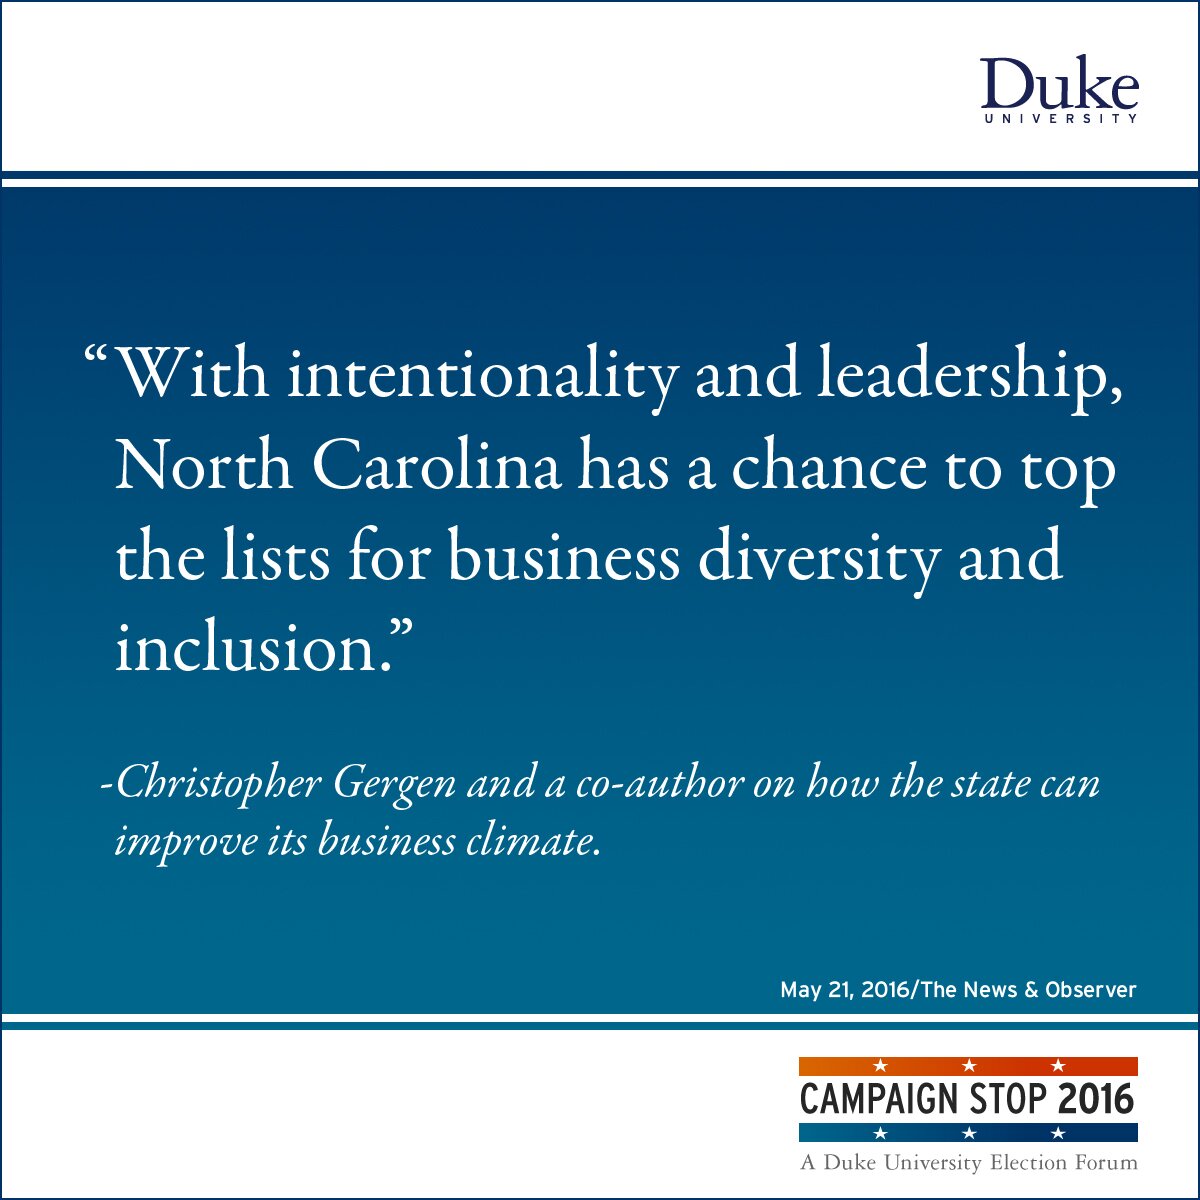 “With intentionality and leadership, North Carolina has a chance to top the lists for business diversity and inclusion.” -Christopher Gergen and a co-author on how the state can improve its business climate.